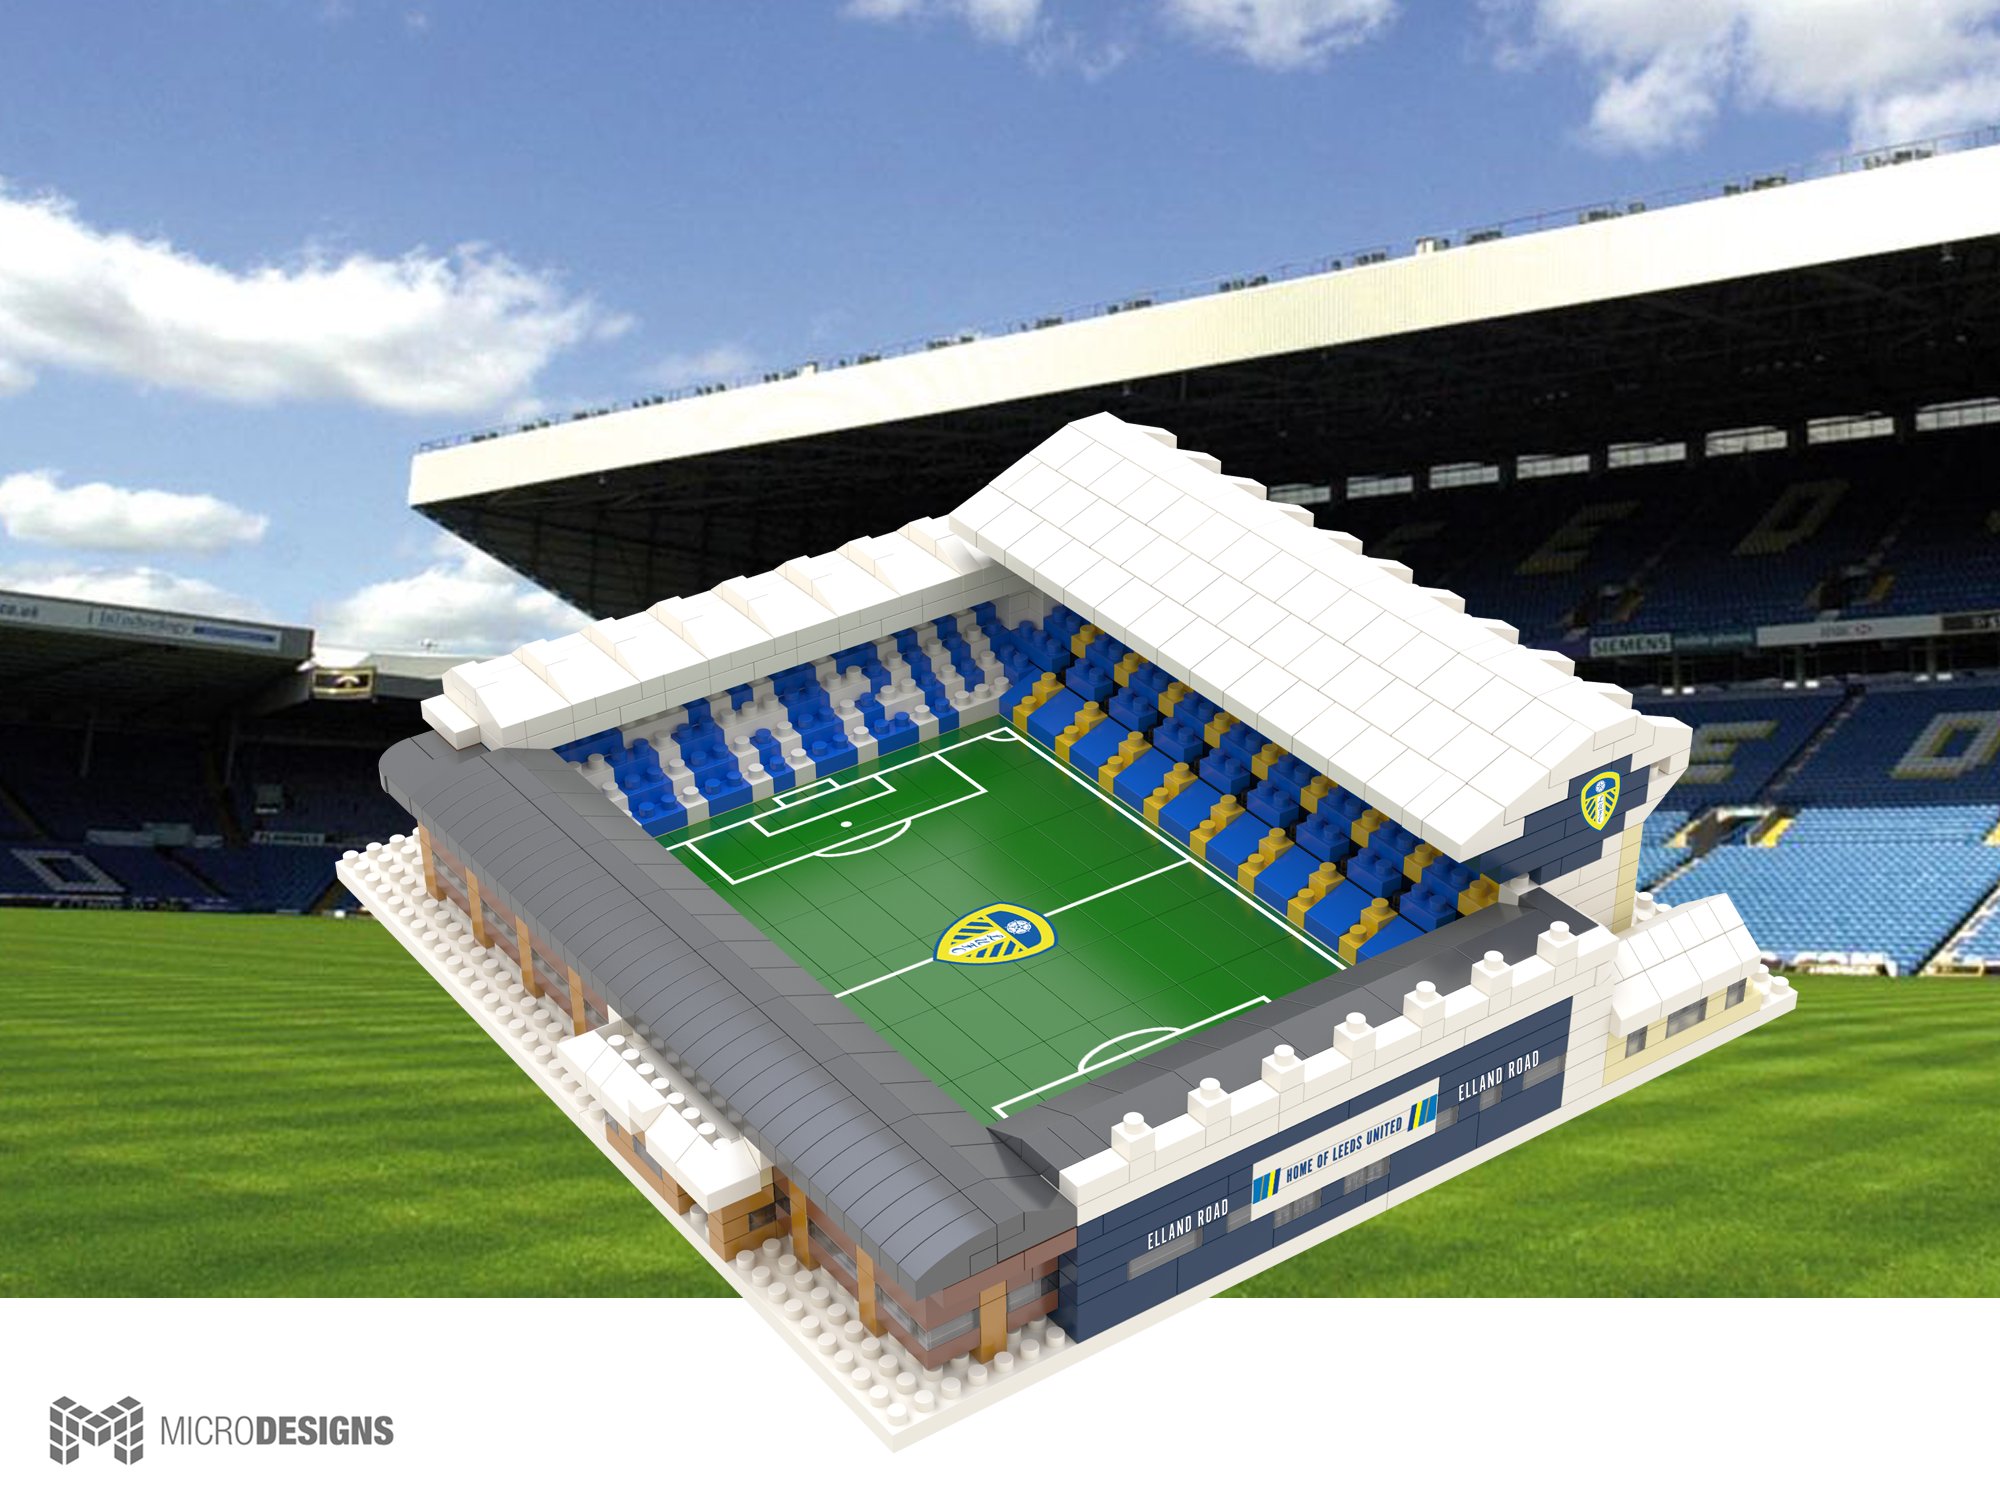 MICRODESIGNS on Twitter: "Buy the official Leeds United Elland Road block model for only £25. Available now! https://t.co/7RclGi2CGS https://t.co/IcMVwbePZO" /